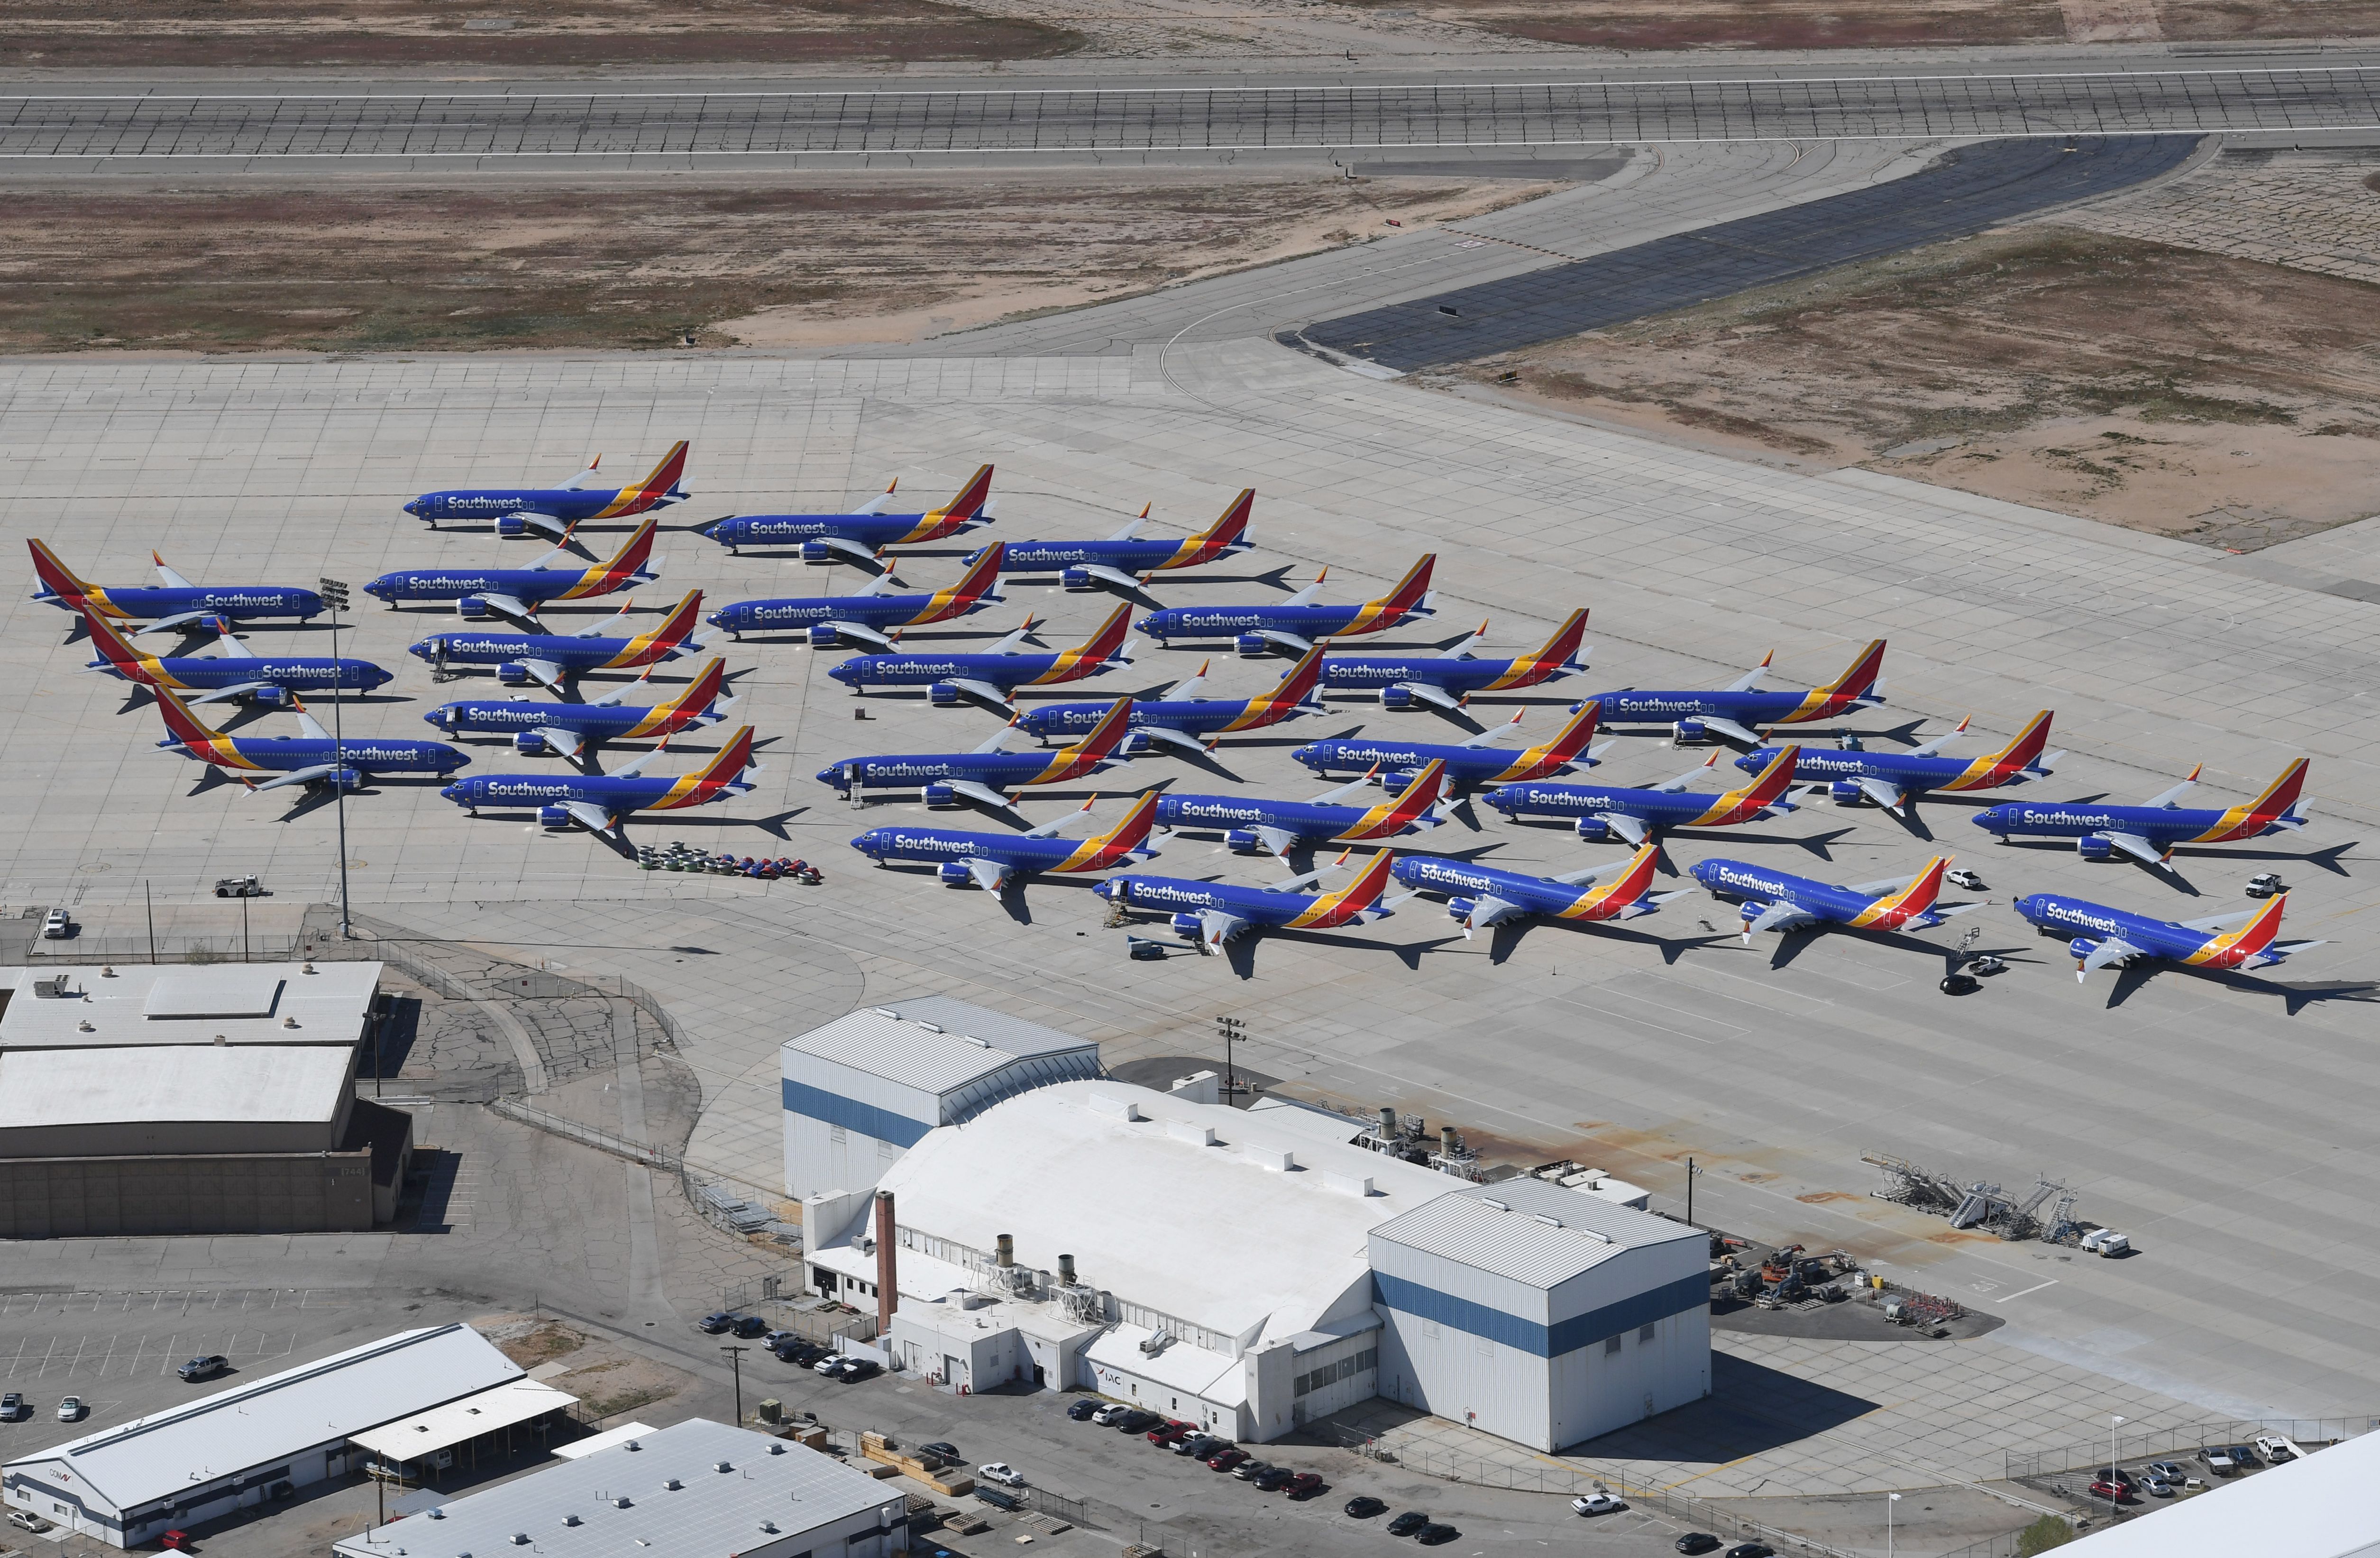 Southwest Airlines Boeing 737 MAX aircraft are parked on the tarmac after being grounded, at the Southern California Logistics Airport in Victorville, California 